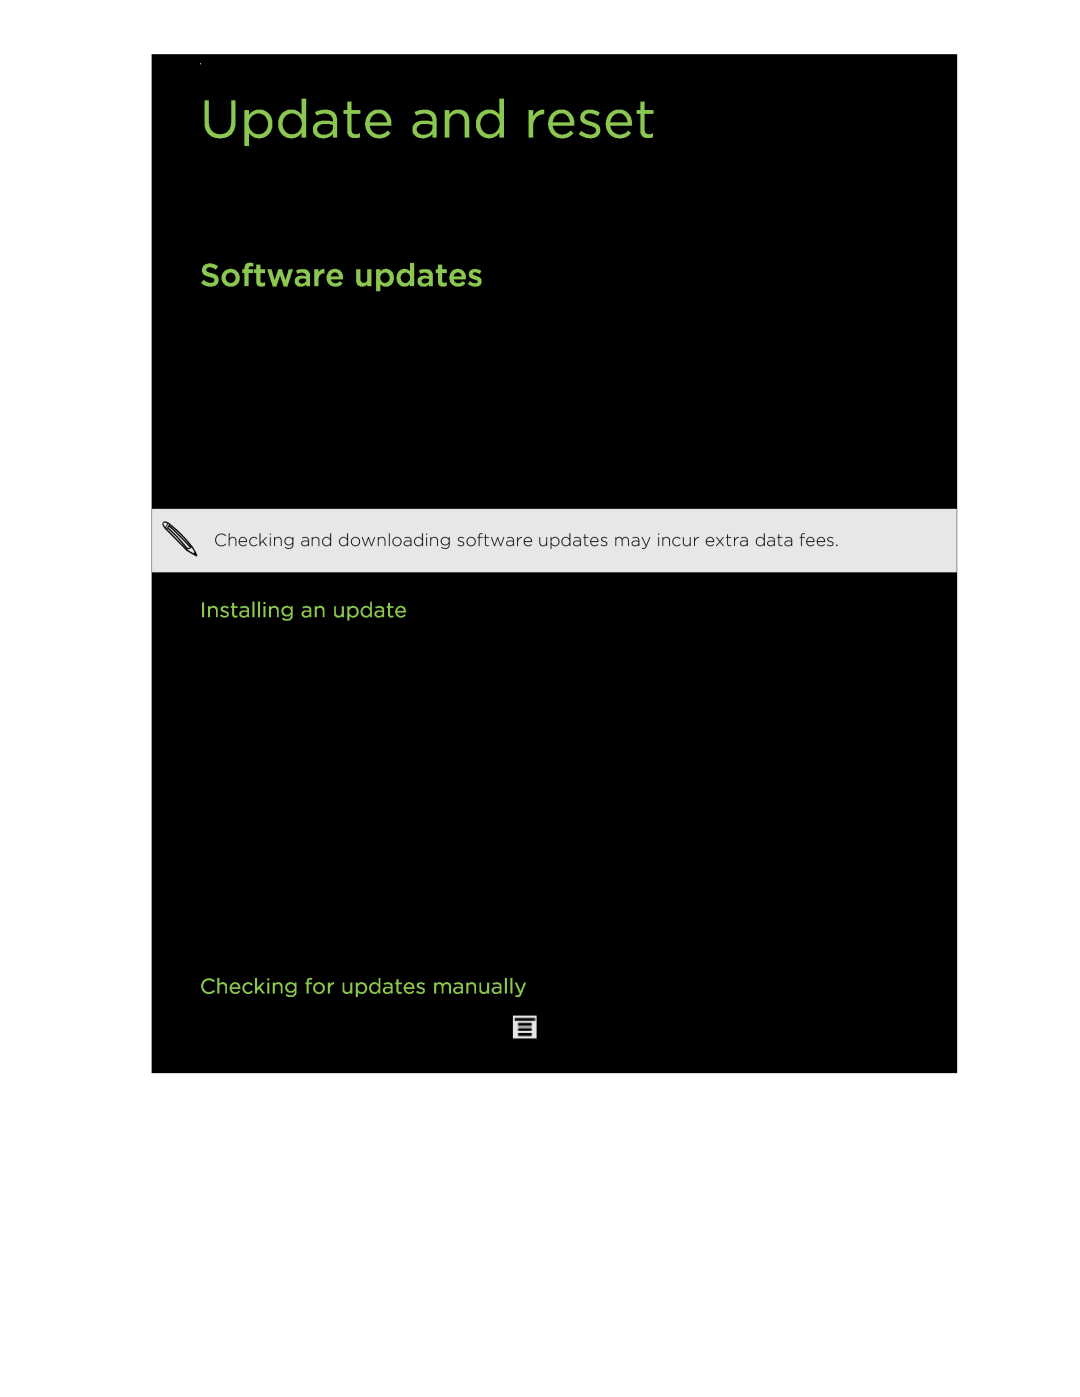 HTC HTCFlyerP512 Update and reset, Software updates, Installing an update, Checking for updates manually 